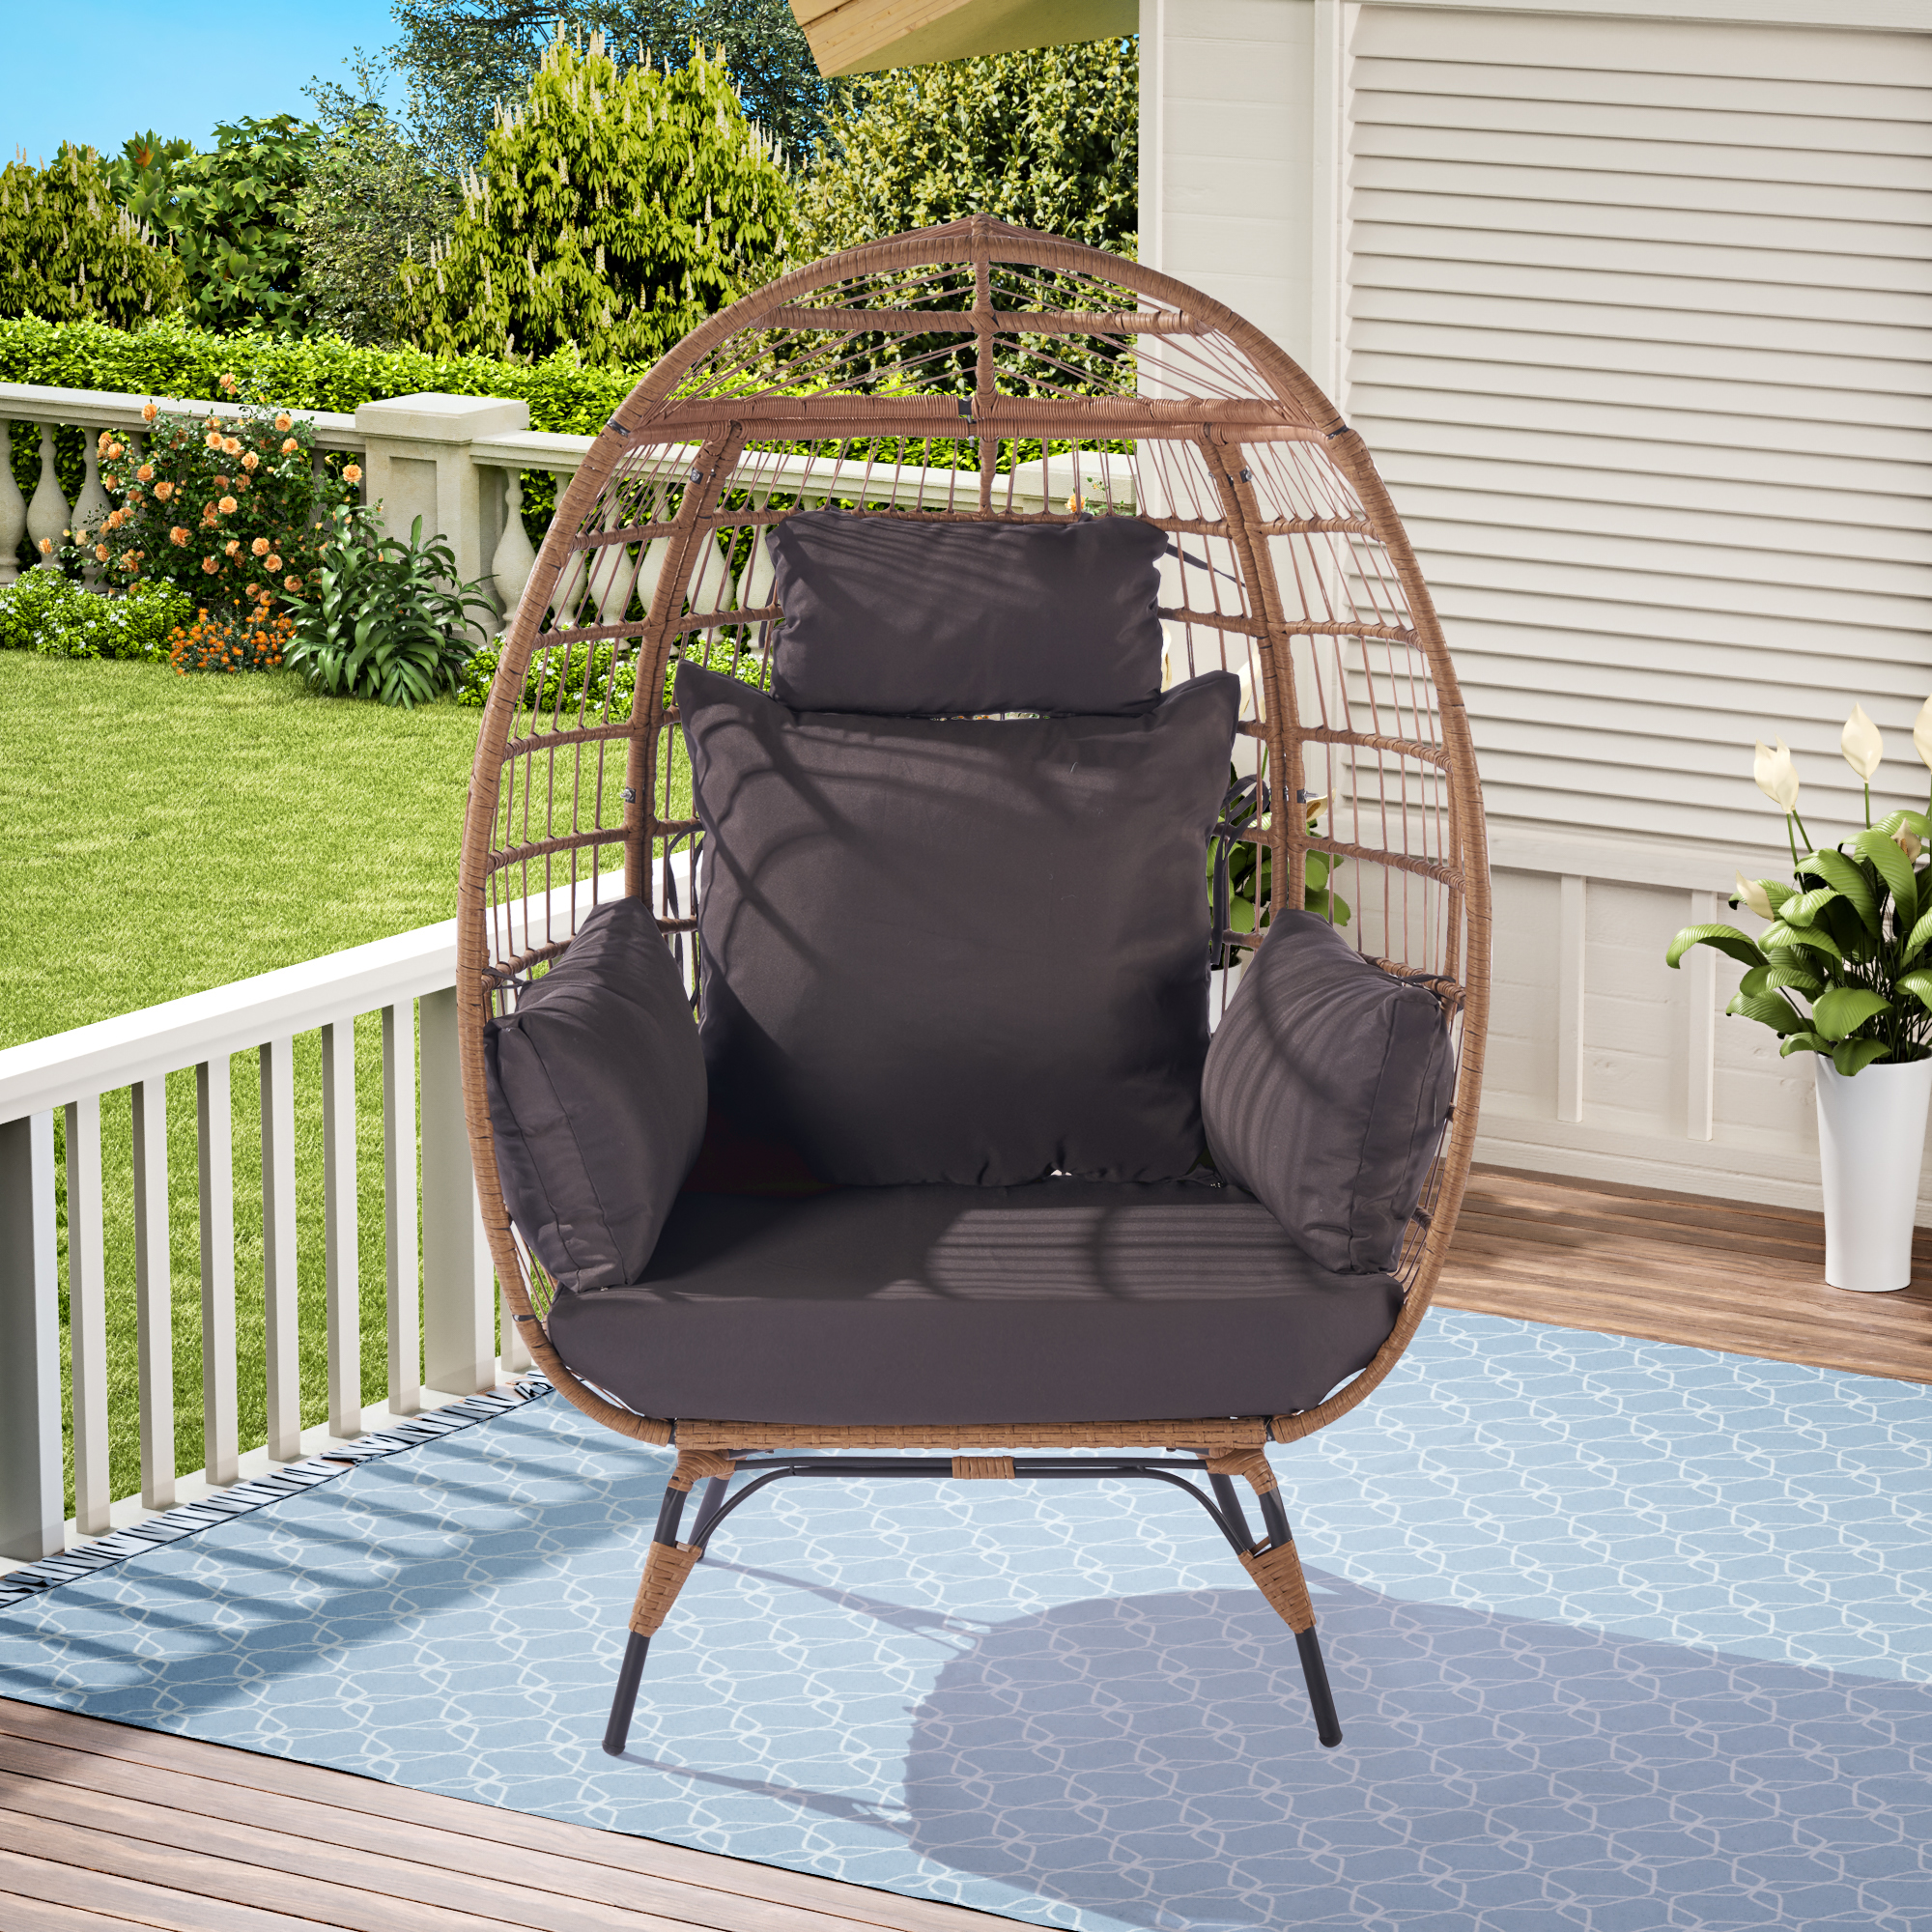 Wicker Egg Chair, Oversized Indoor Outdoor Boho Lounger Chair Stationary Egg Basket Chair, All-Weather 440lb Capacity Patio Chair, Dark Gray - image 1 of 9